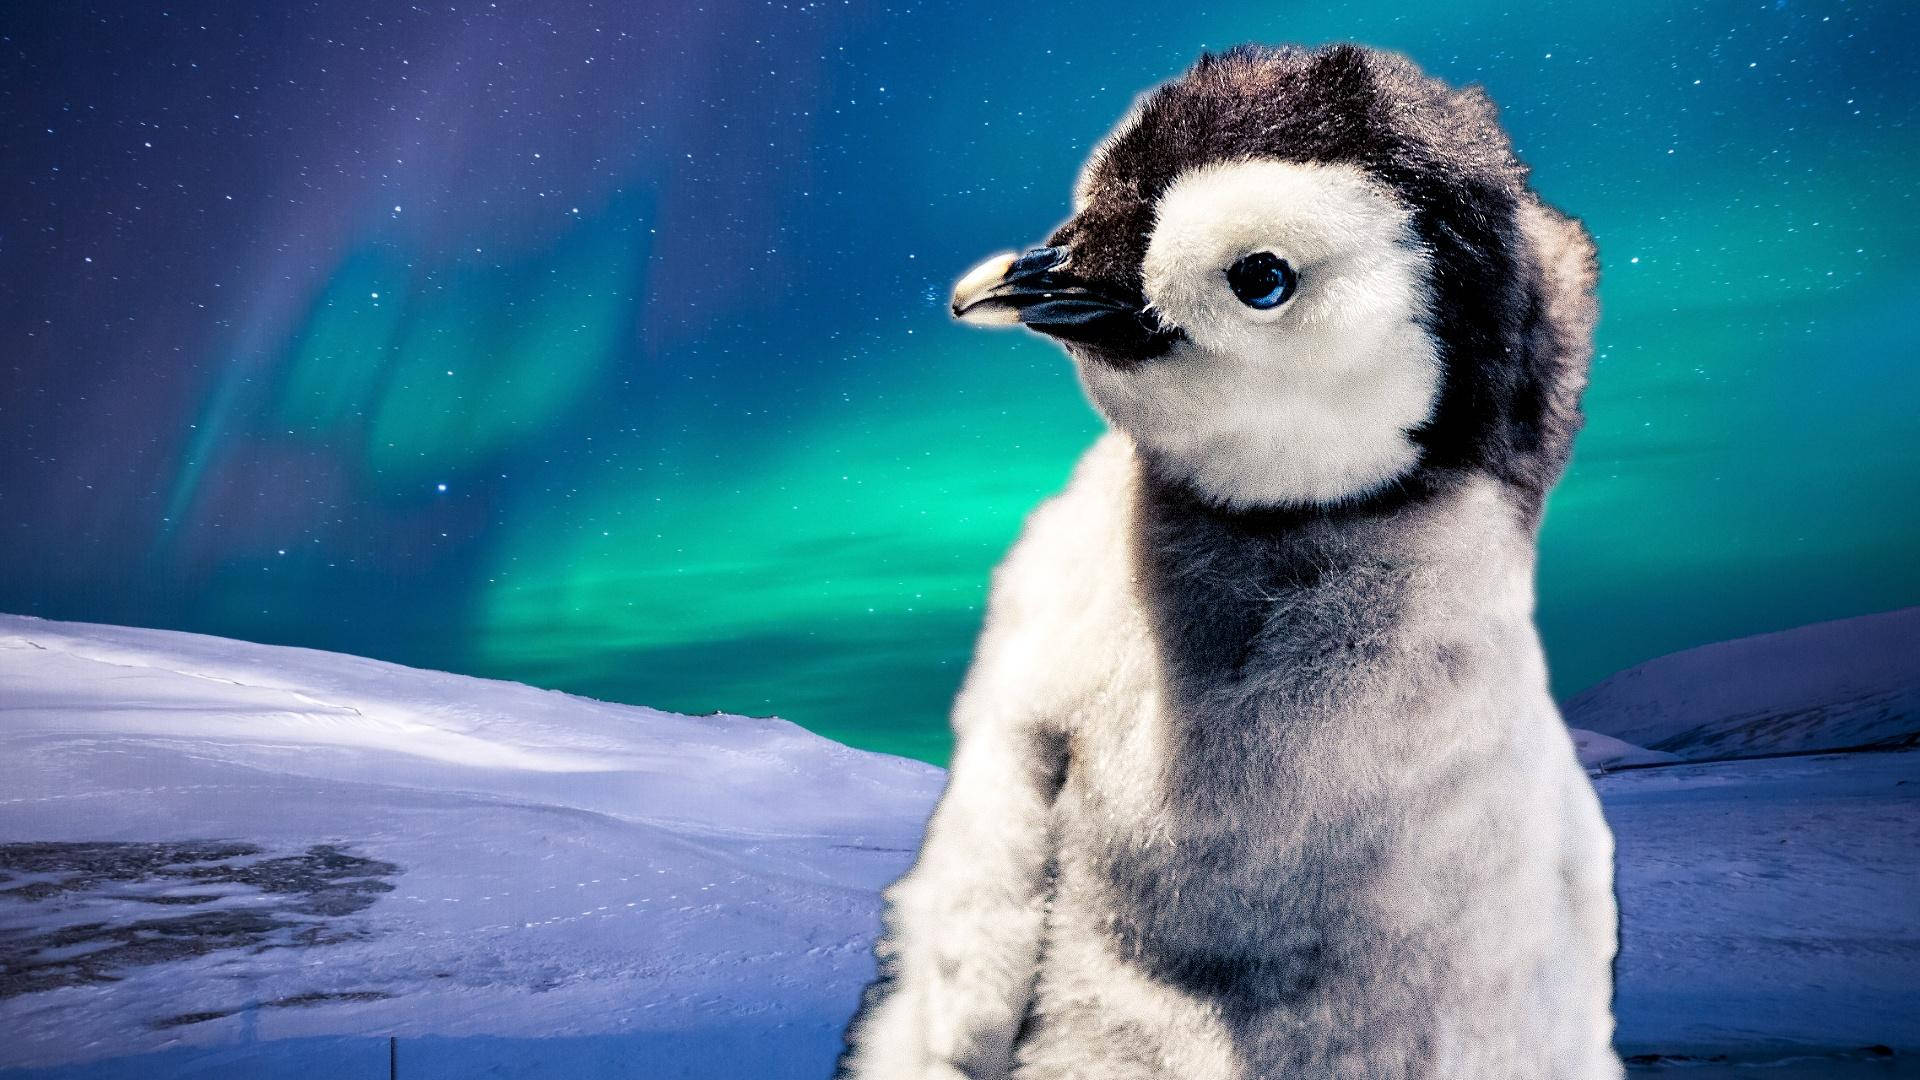 Baby Penguin And Northern Lights Background